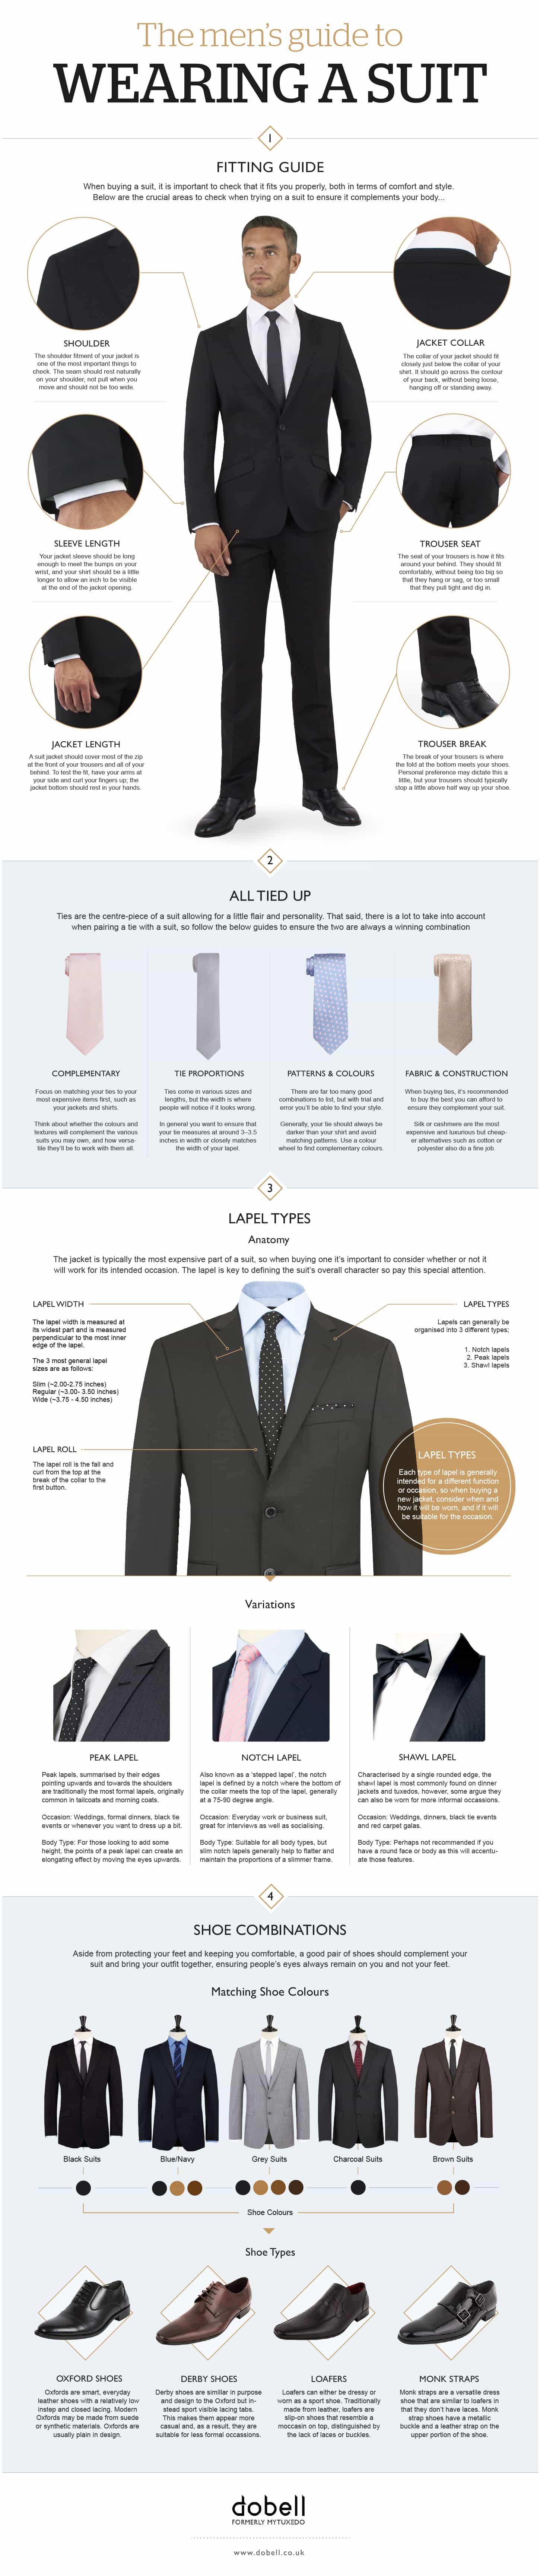 gude to wearing a suit, how to look good in a suit, how you should wear a suit, infographic